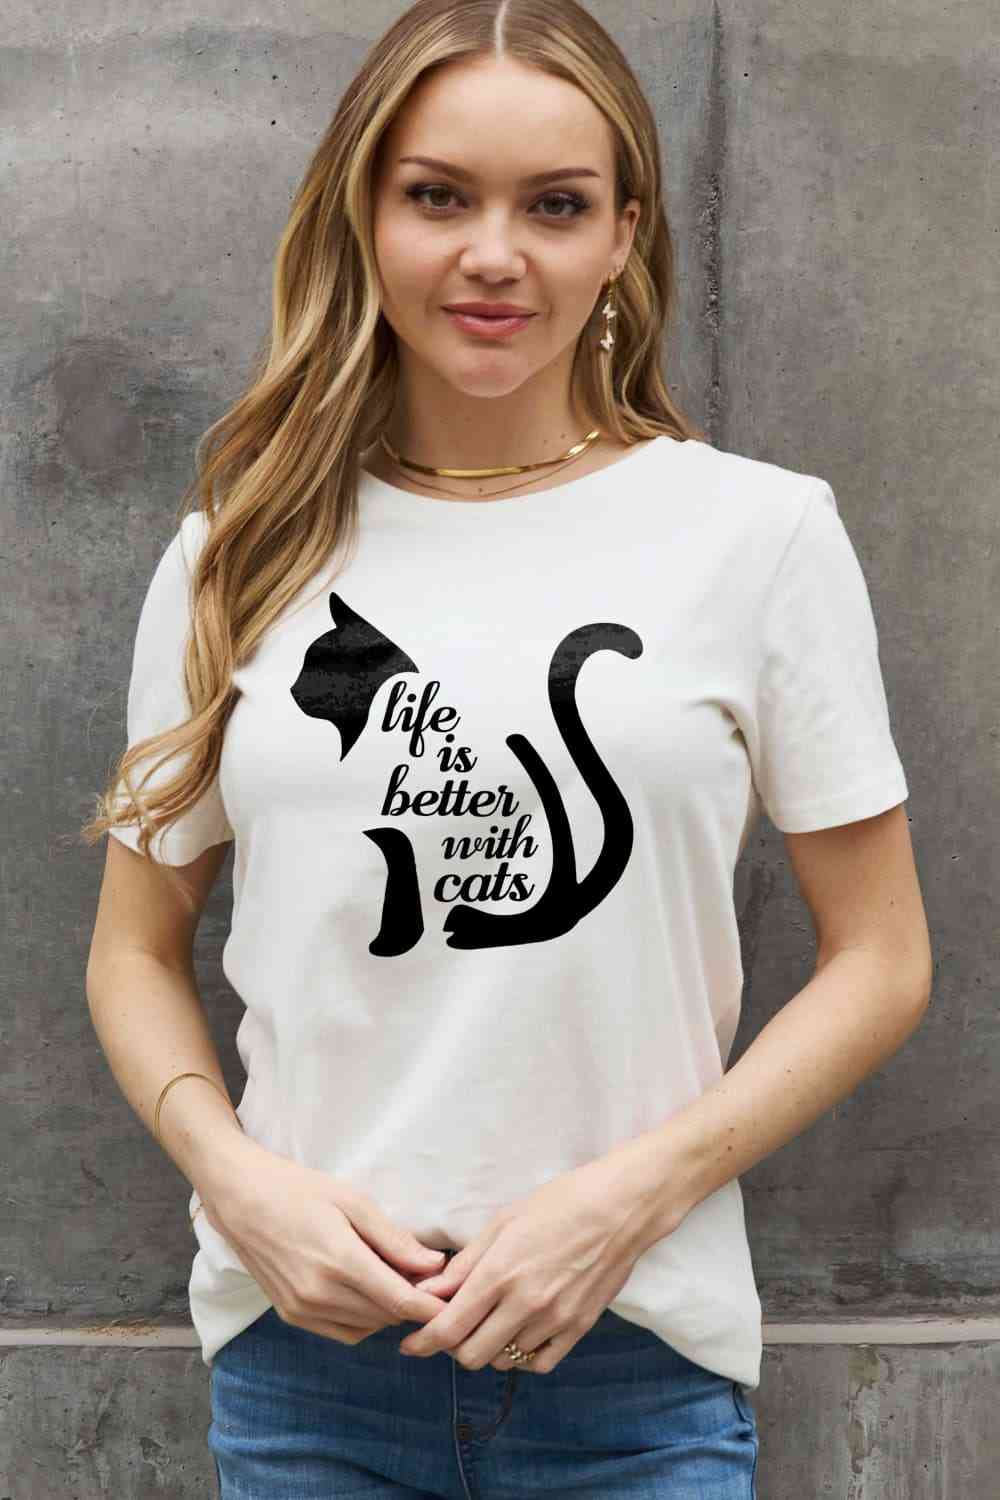 LIFE IS BETTER WITH CATS Graphic Cotton Tee - Kawaii Stop - Casual Style, Cat Dad, Cat Enthusiast, Cat Lover Tee, Cat Mom, Comfortable Fit, Confidence Booster, Everyday Wear, Fashion, Furry Companions, Graphic Cotton Tee, High-Quality Cotton, Long Length, Must-Have, Opaque Tee, Round Neck, Ship From Overseas, Short Sleeves, Simply Love, Slightly Stretchy, Stylish, T-Shirt, Versatile, Women's Tee